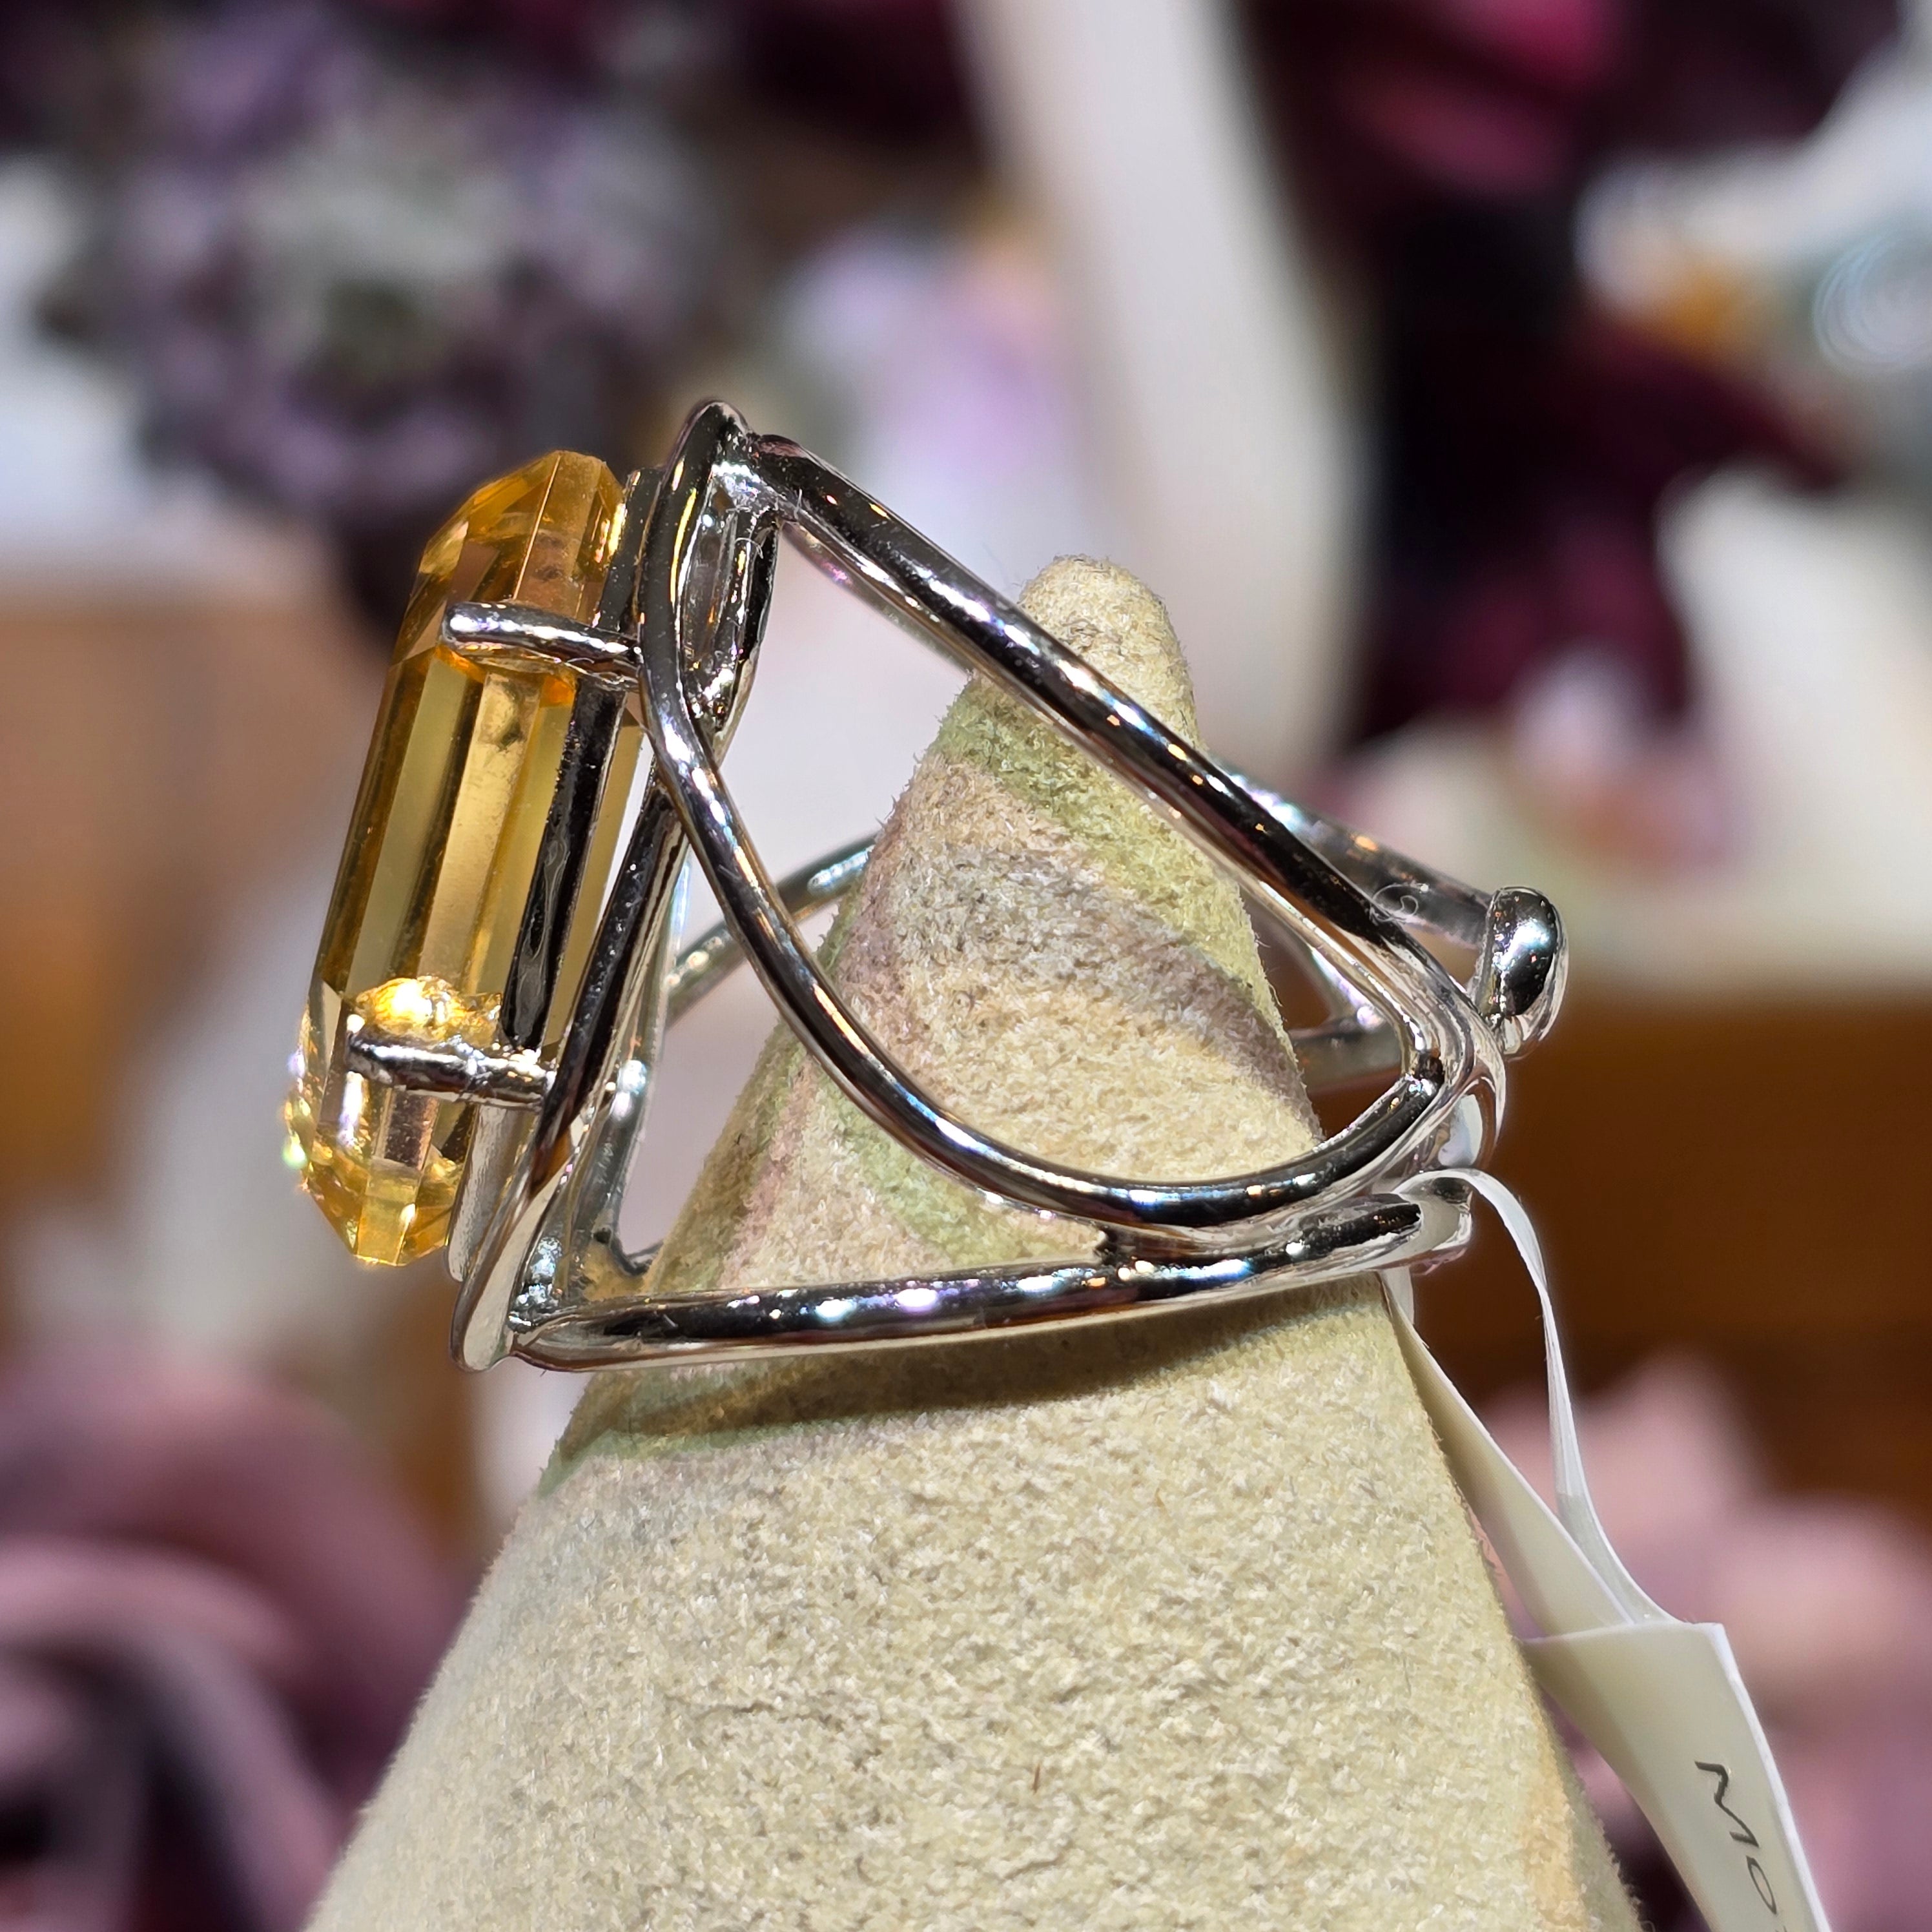 Citrine Mother Mary Finger Cuff Adjustable Ring .925 Silver for Abundance, Luck and Personal Power